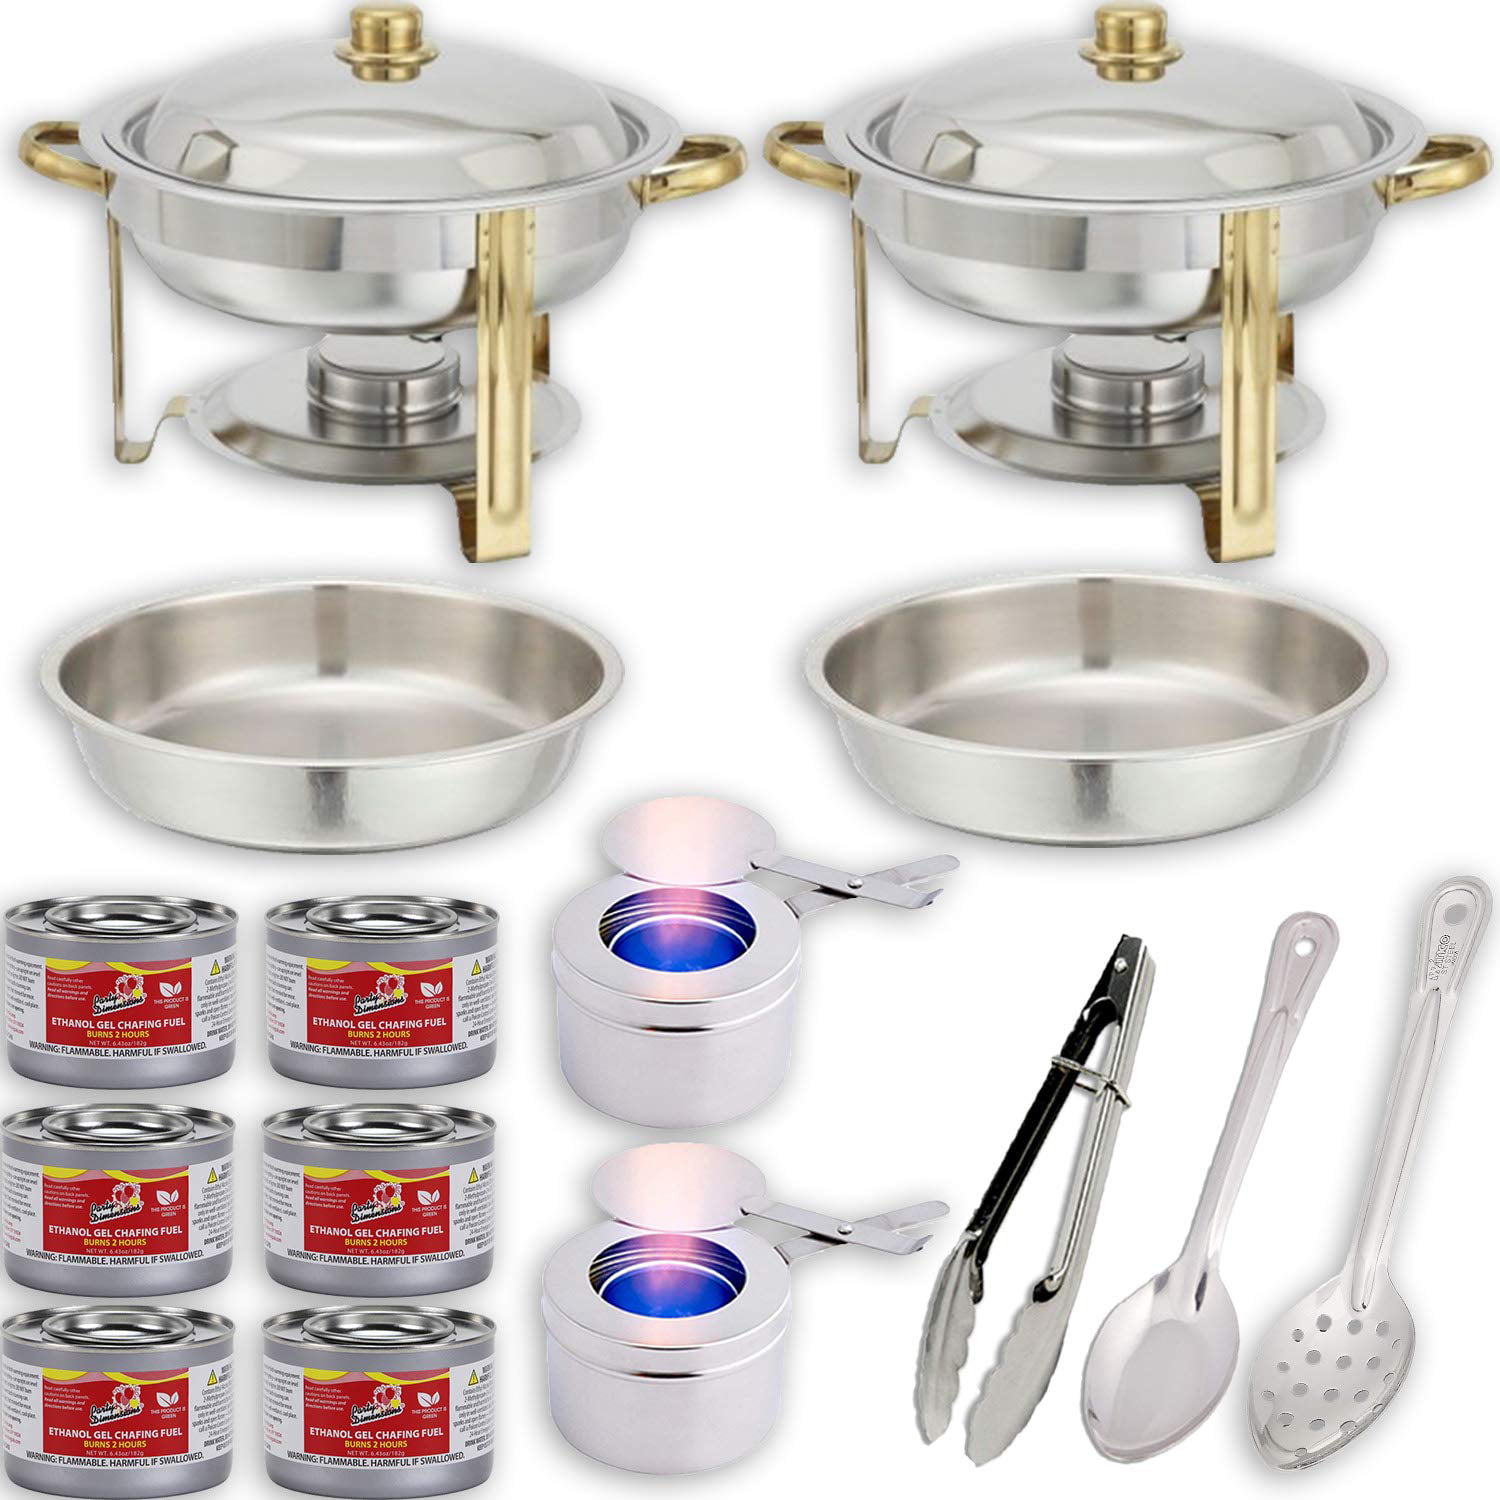 6 Fuel Cans Warmer kit 8 qt 11” Solid & Perforated Spoon + 9” Tongs Water Pan Serving Utensils 4qt x 2 Fuel Holders Chafing Dish Buffet Set w/Fuel — Folding Frame Divided pan + Full Pan 